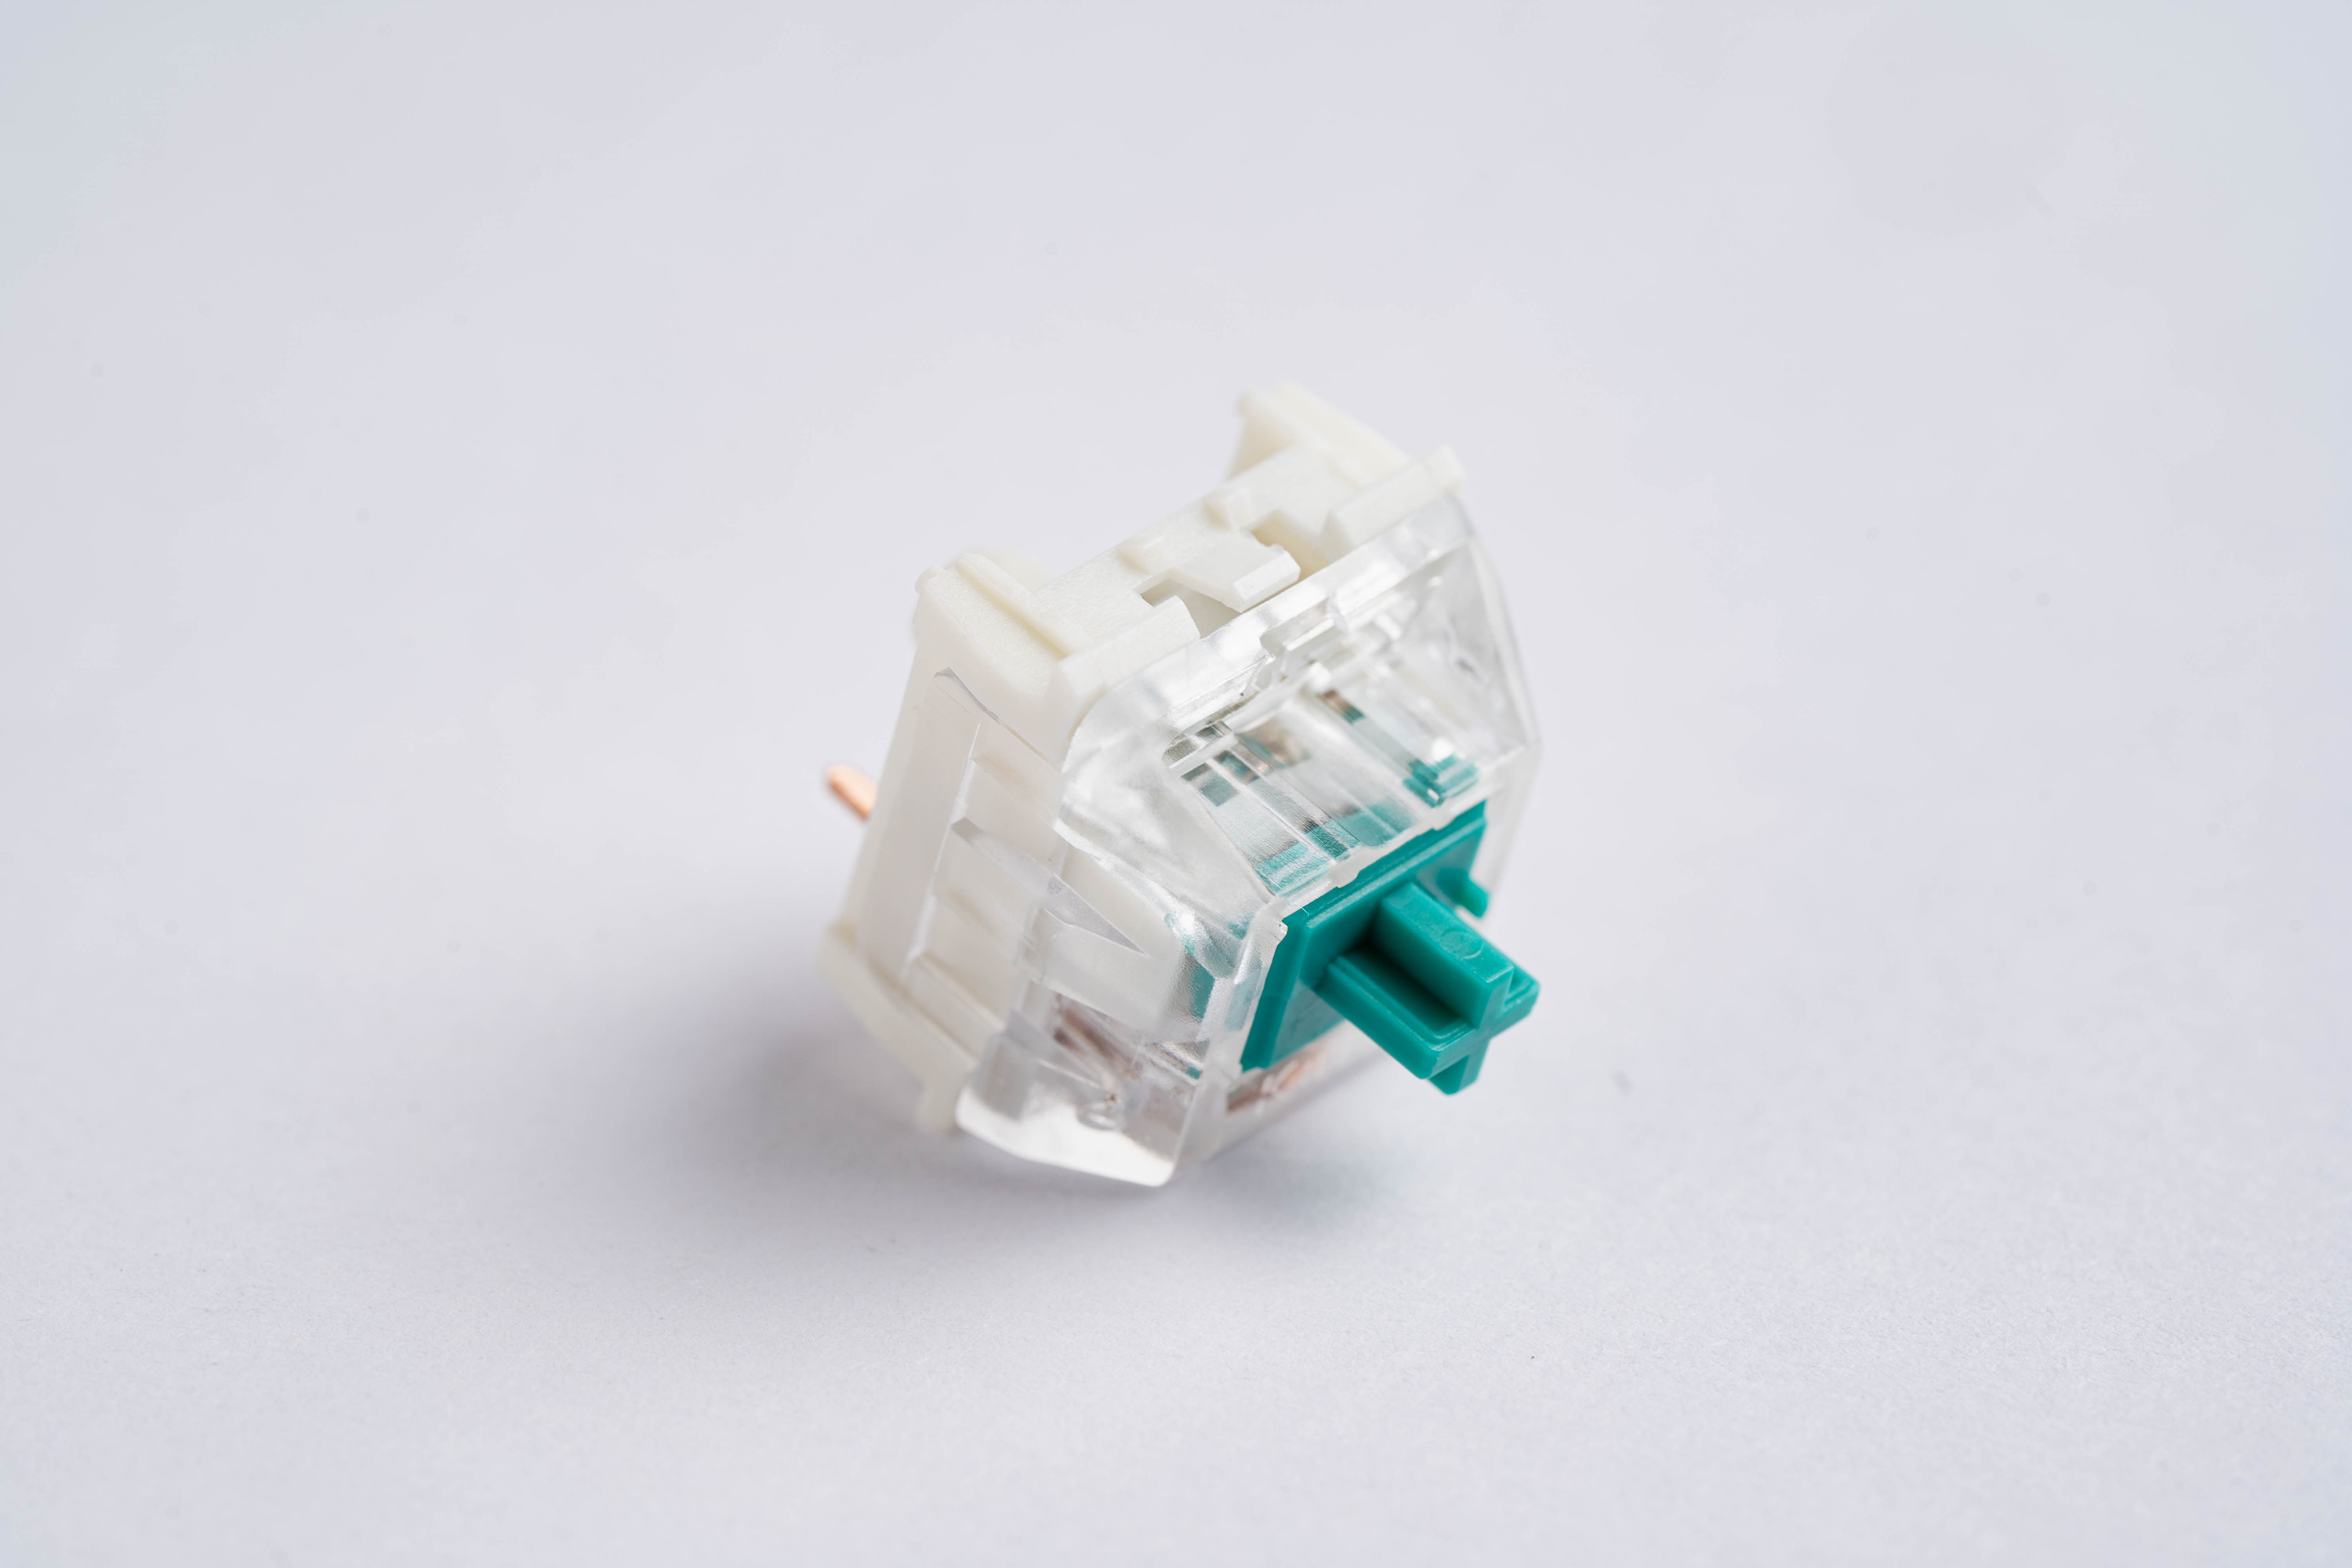 Kailh PRO Light Green Switches - KeebsForAll